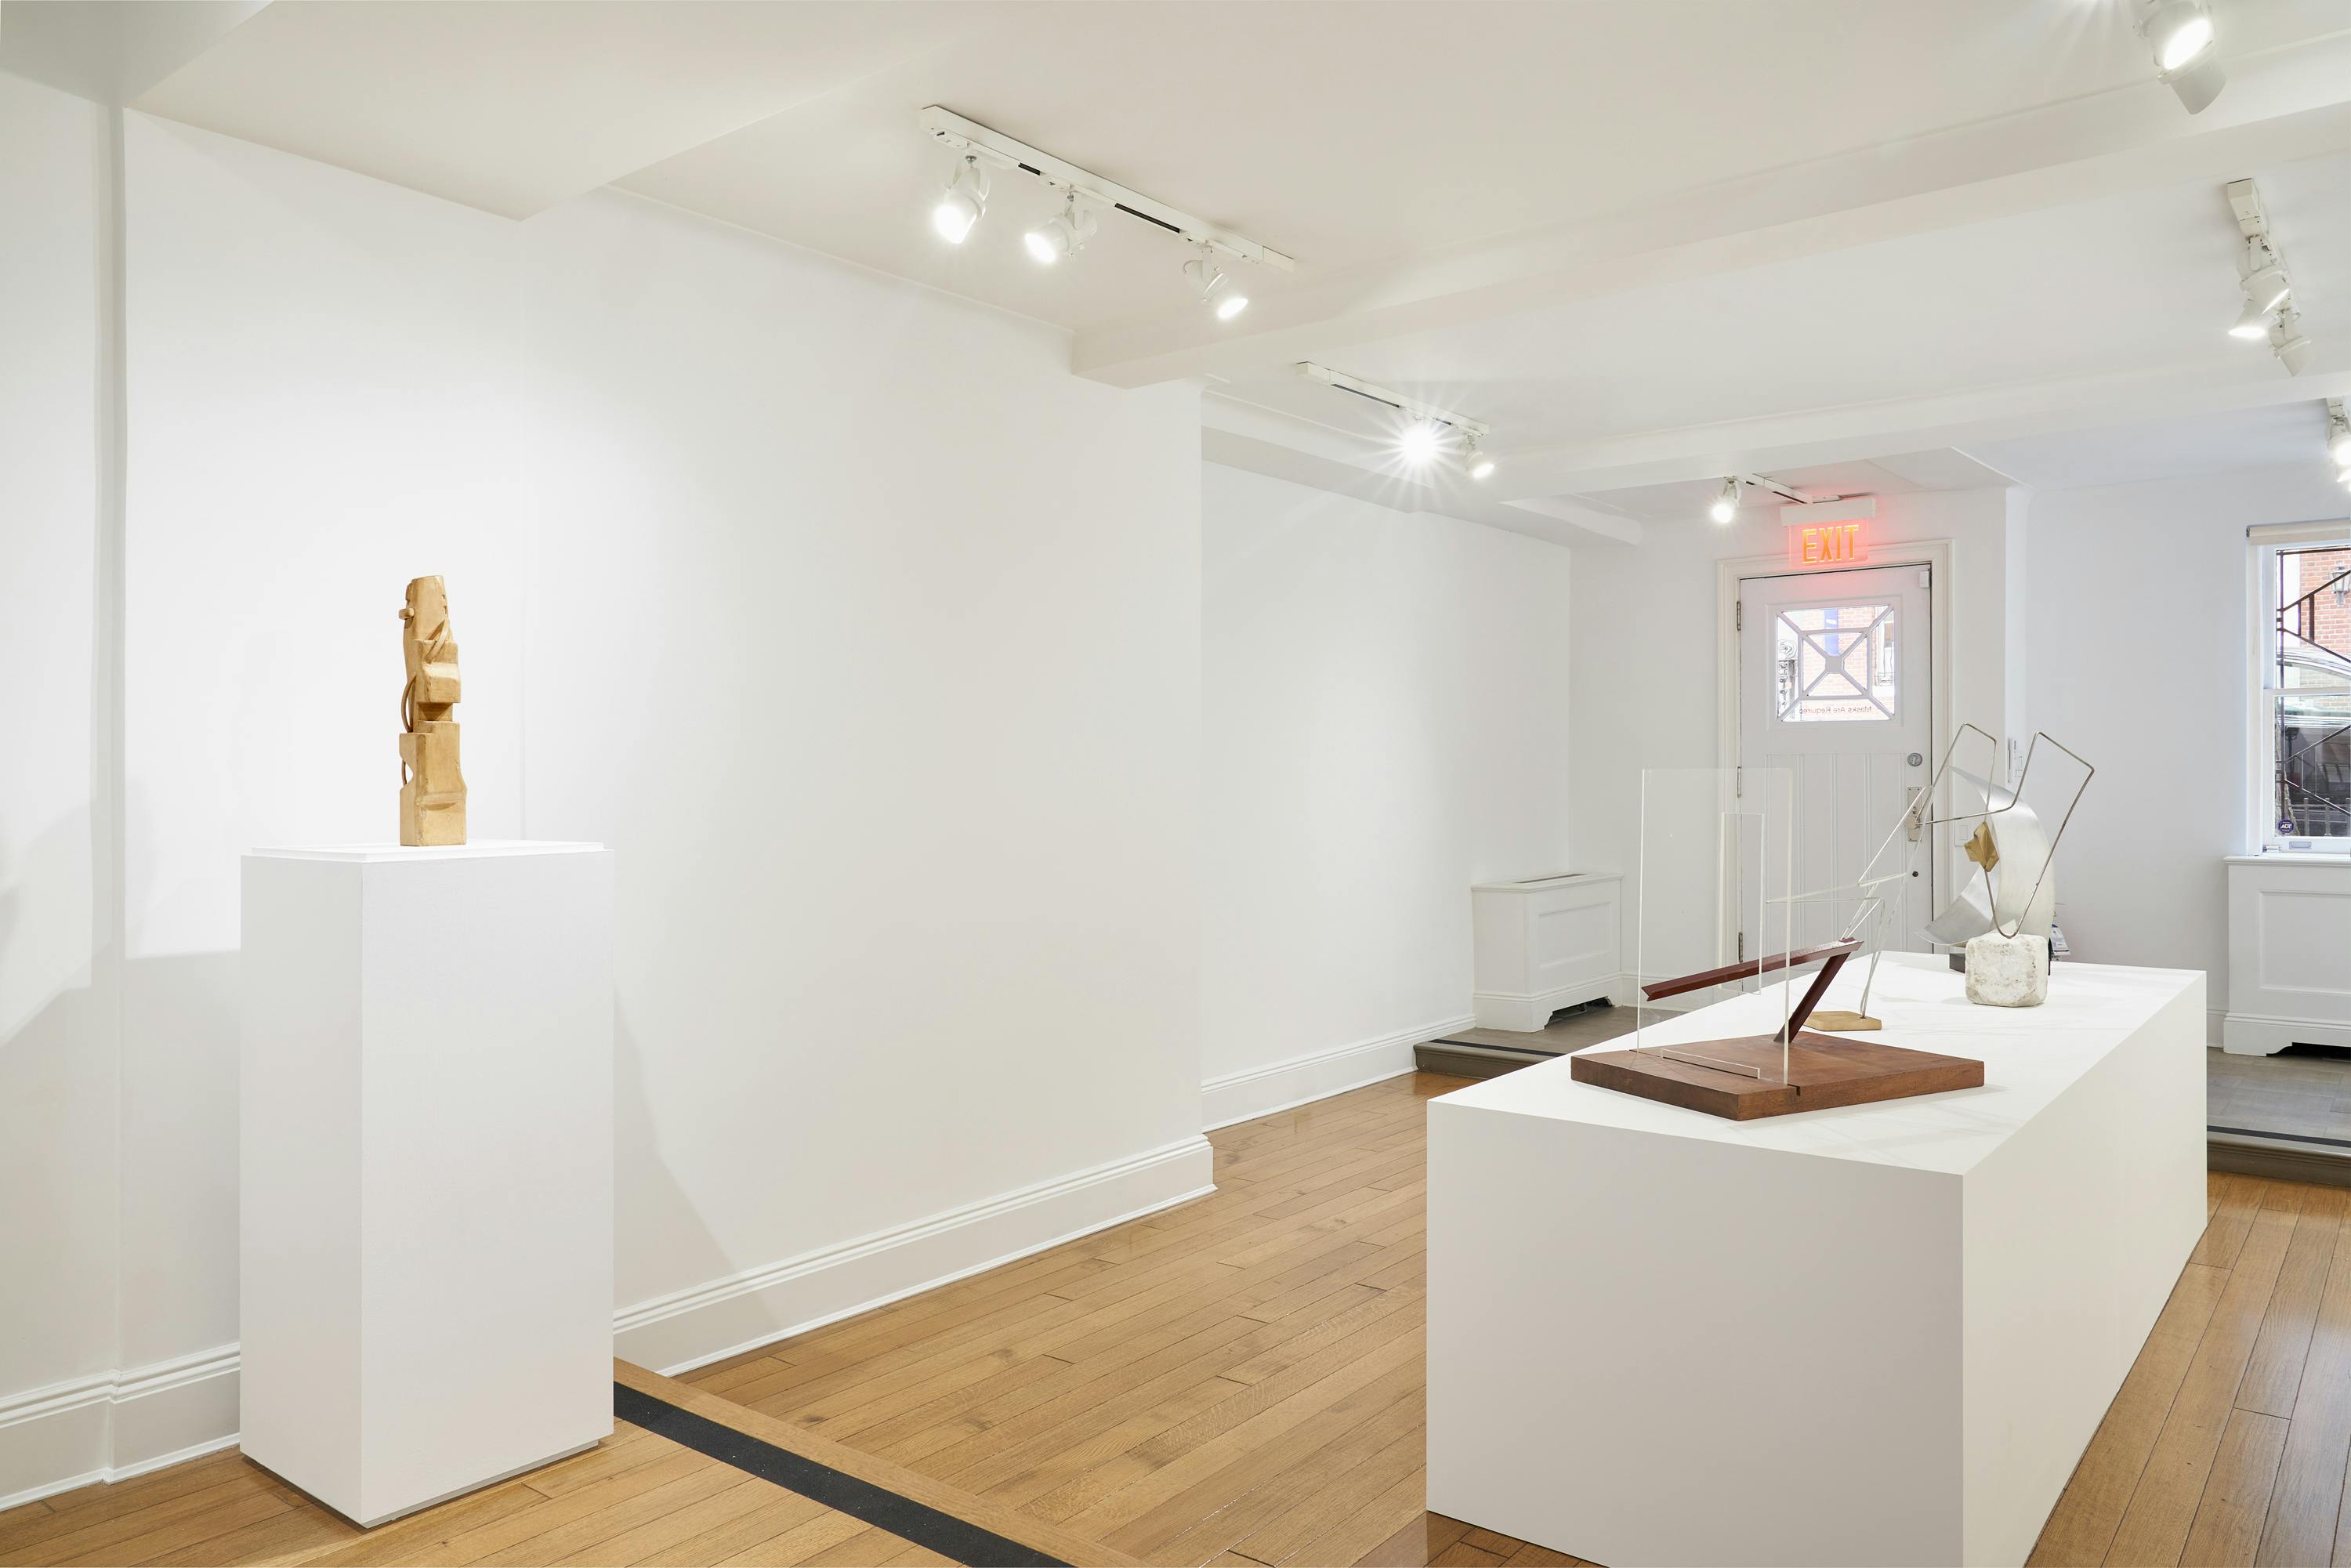 Gallery view of From Surface to Space exhibition showing five free-standing sculptures, and six wall-mounted drawings.